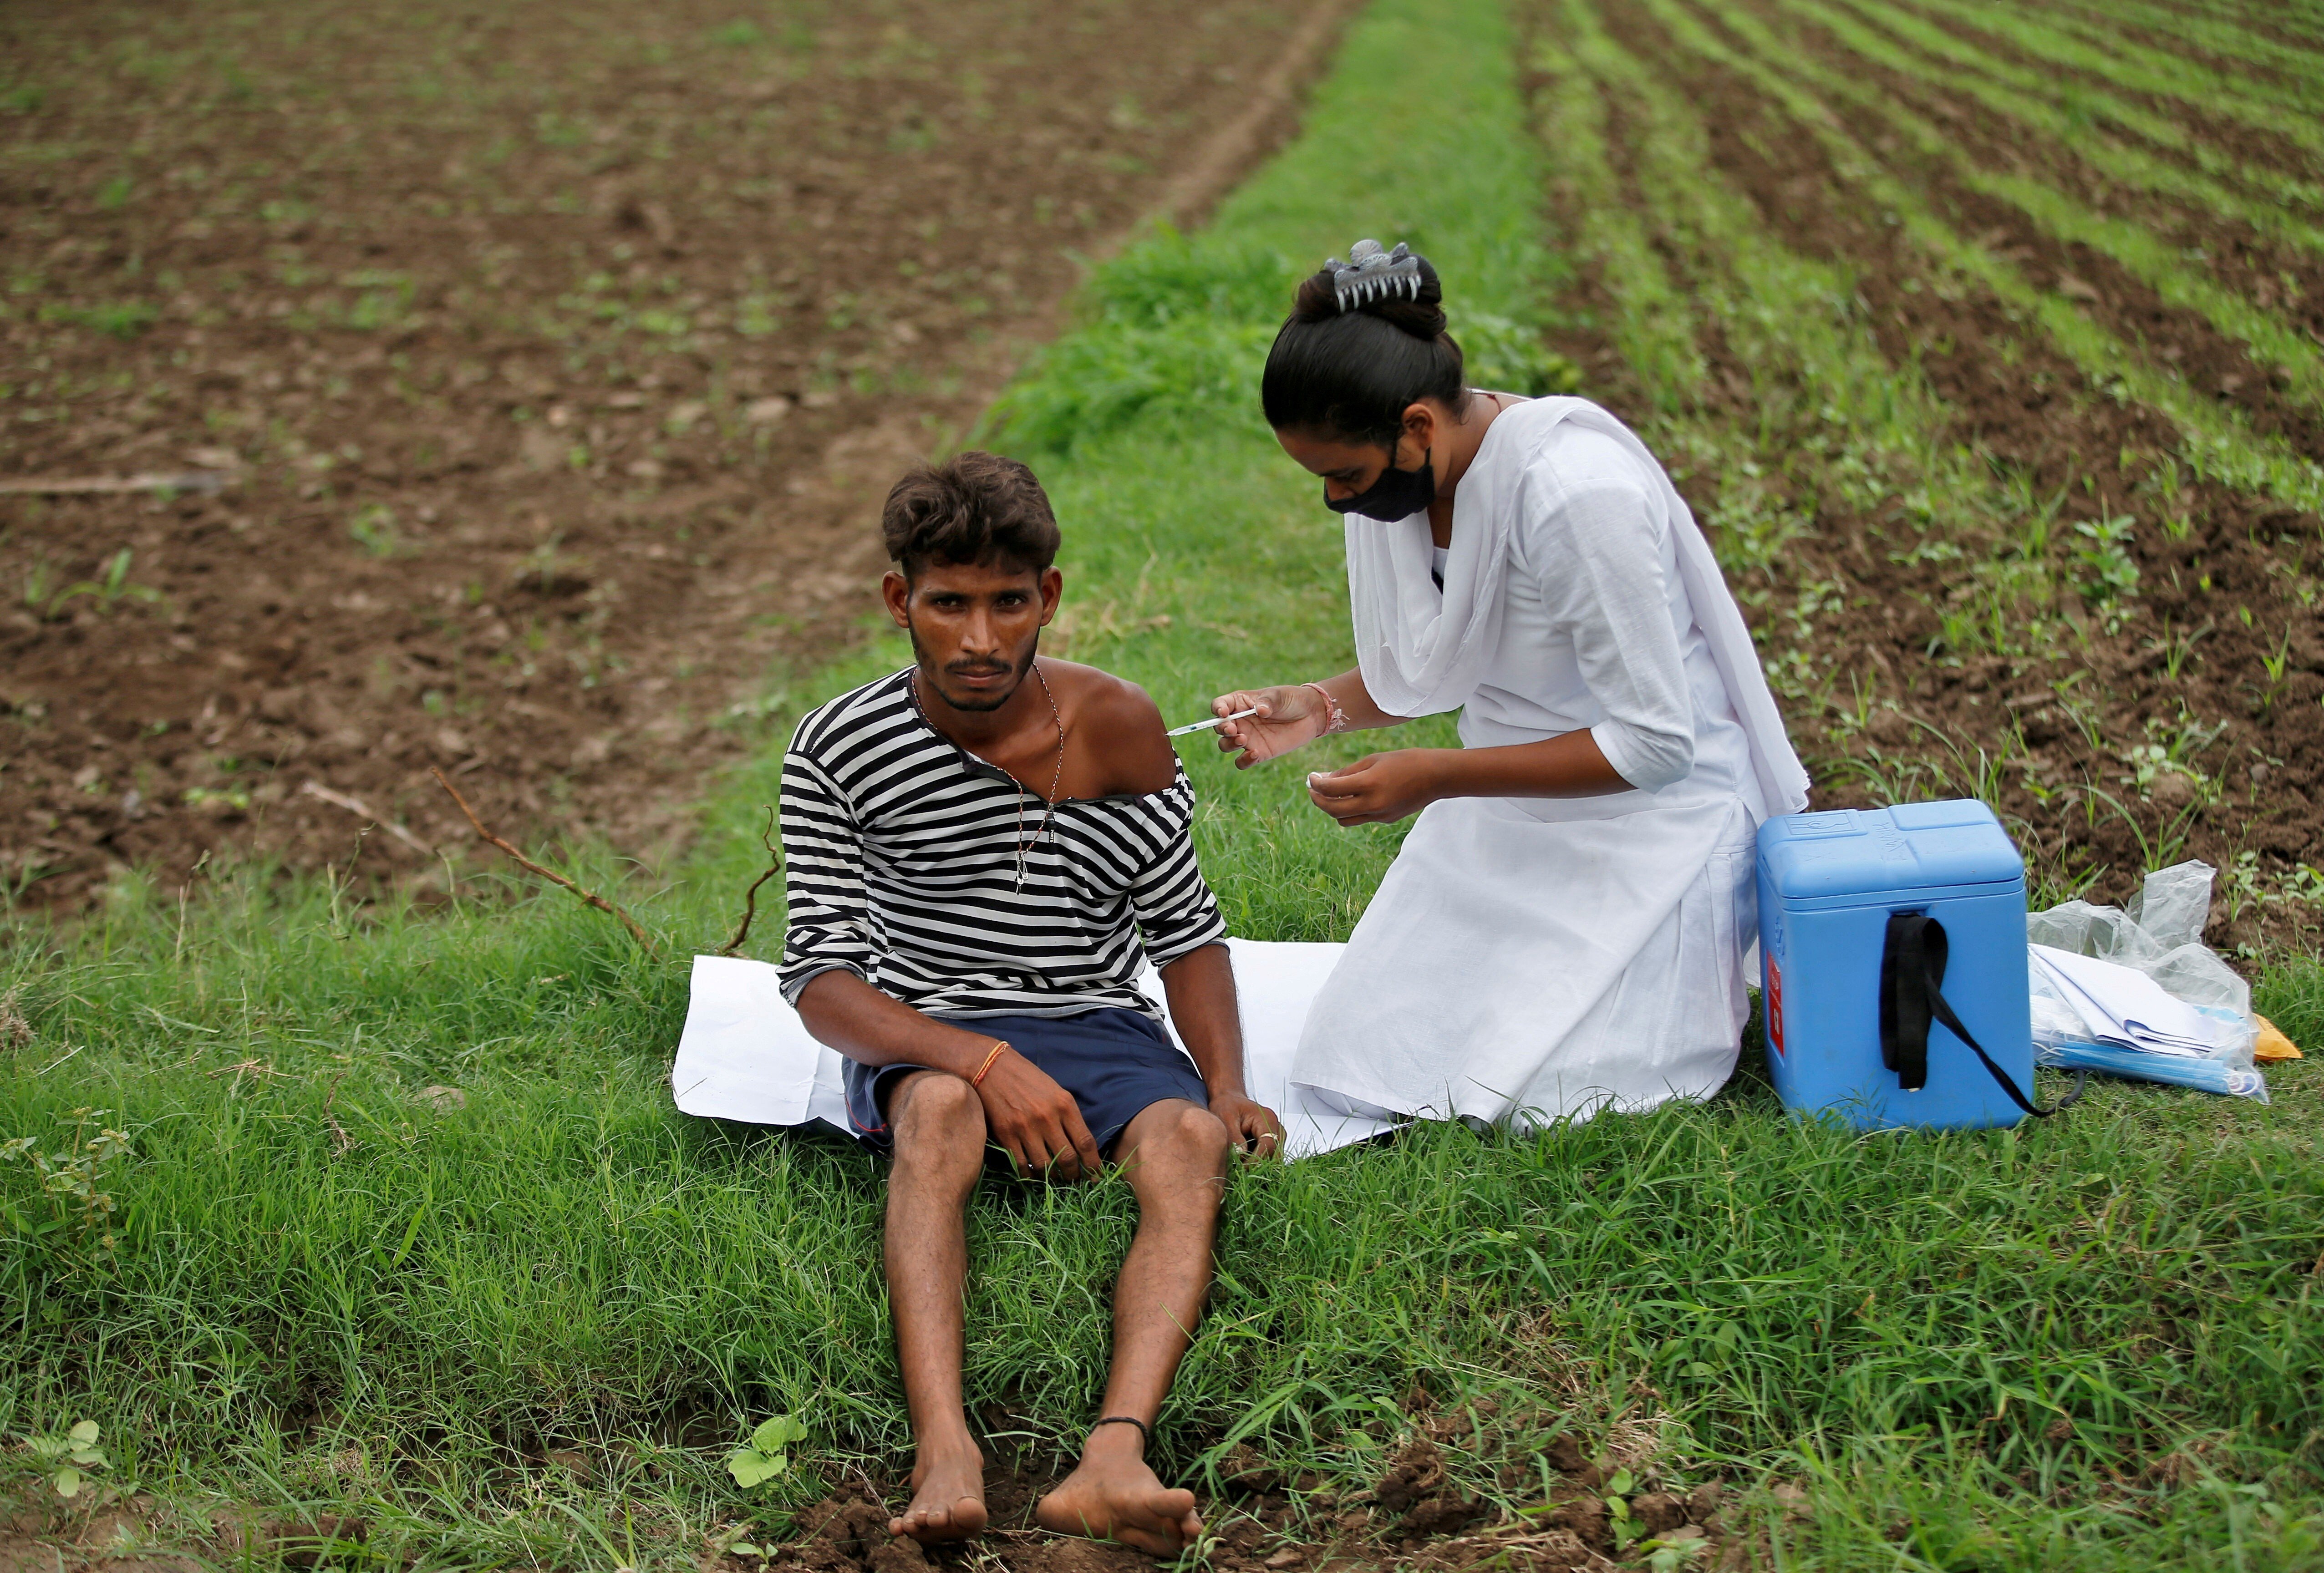 A health worker administers a Covid-19 vaccine dose to a farmer in Gujarat. Photo: Reuters